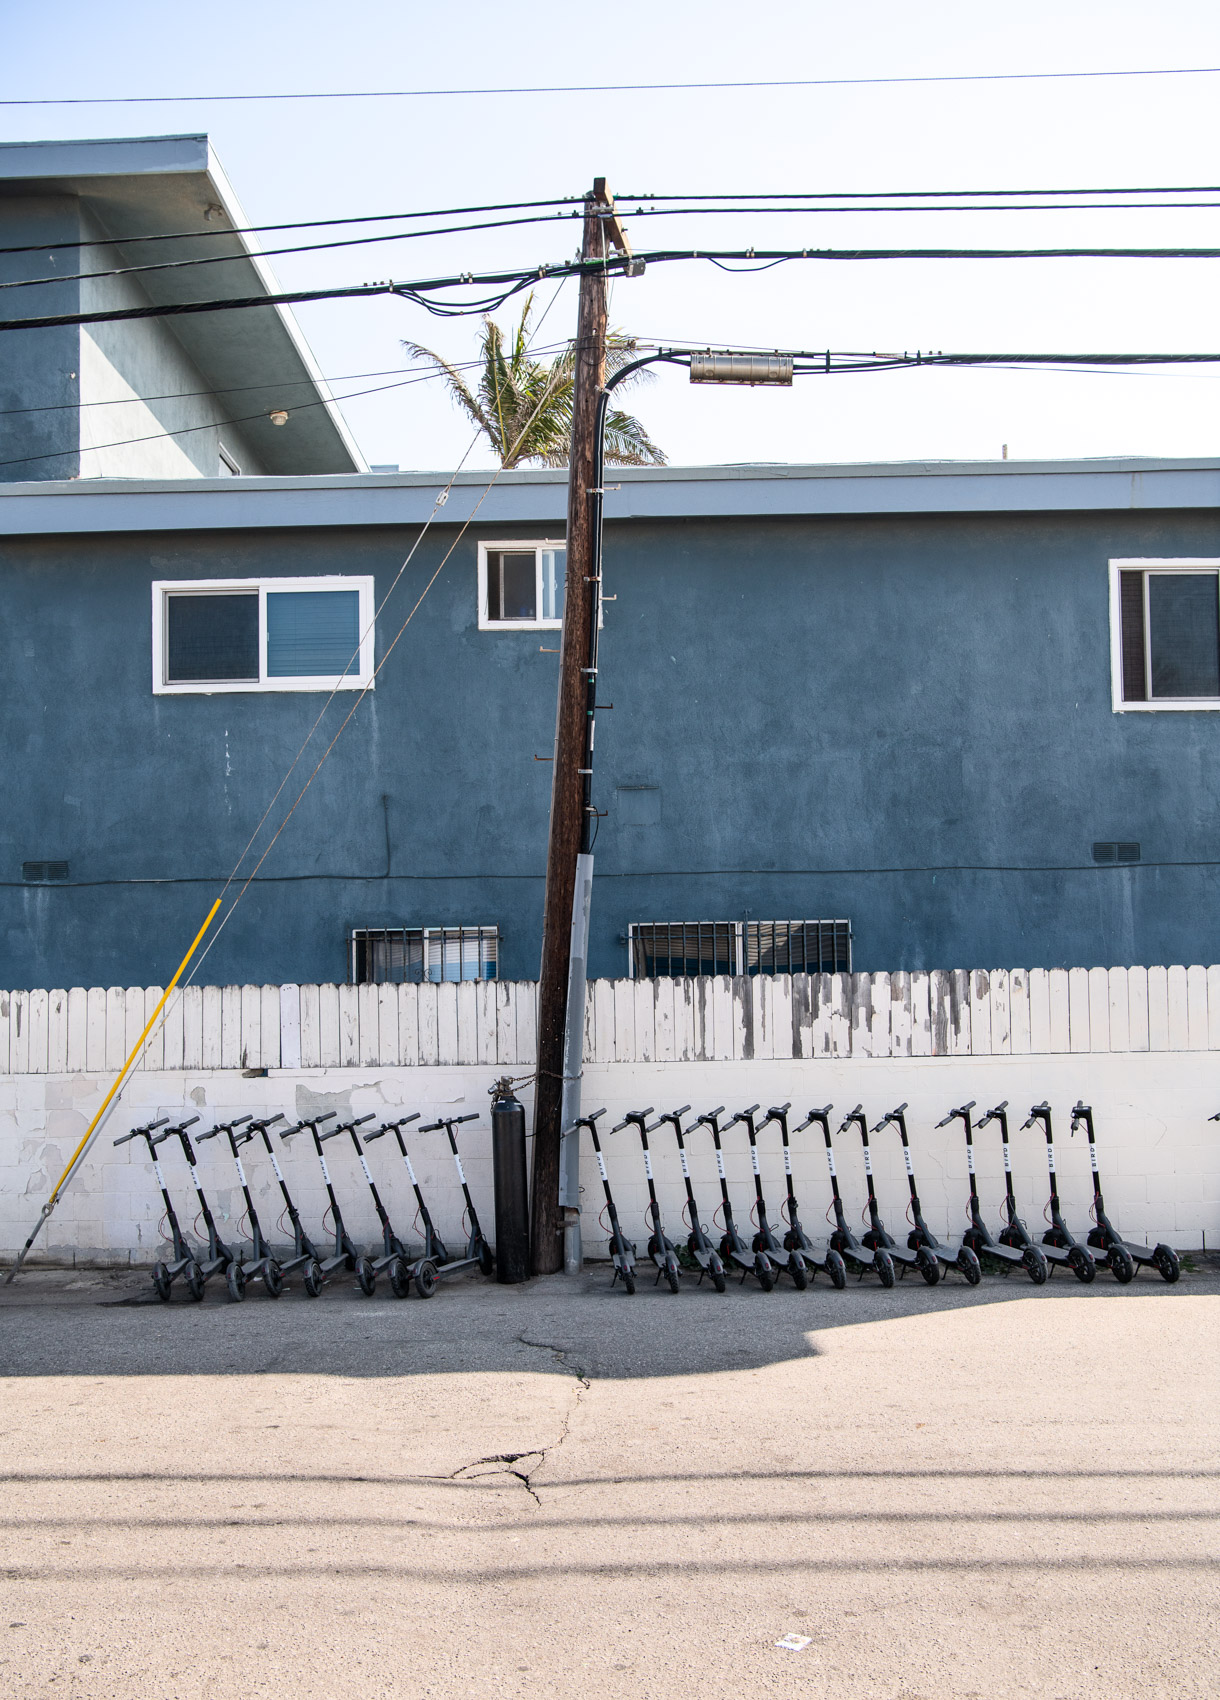 A row of parked Bird dockless scooters in an alley in Venice Beach.